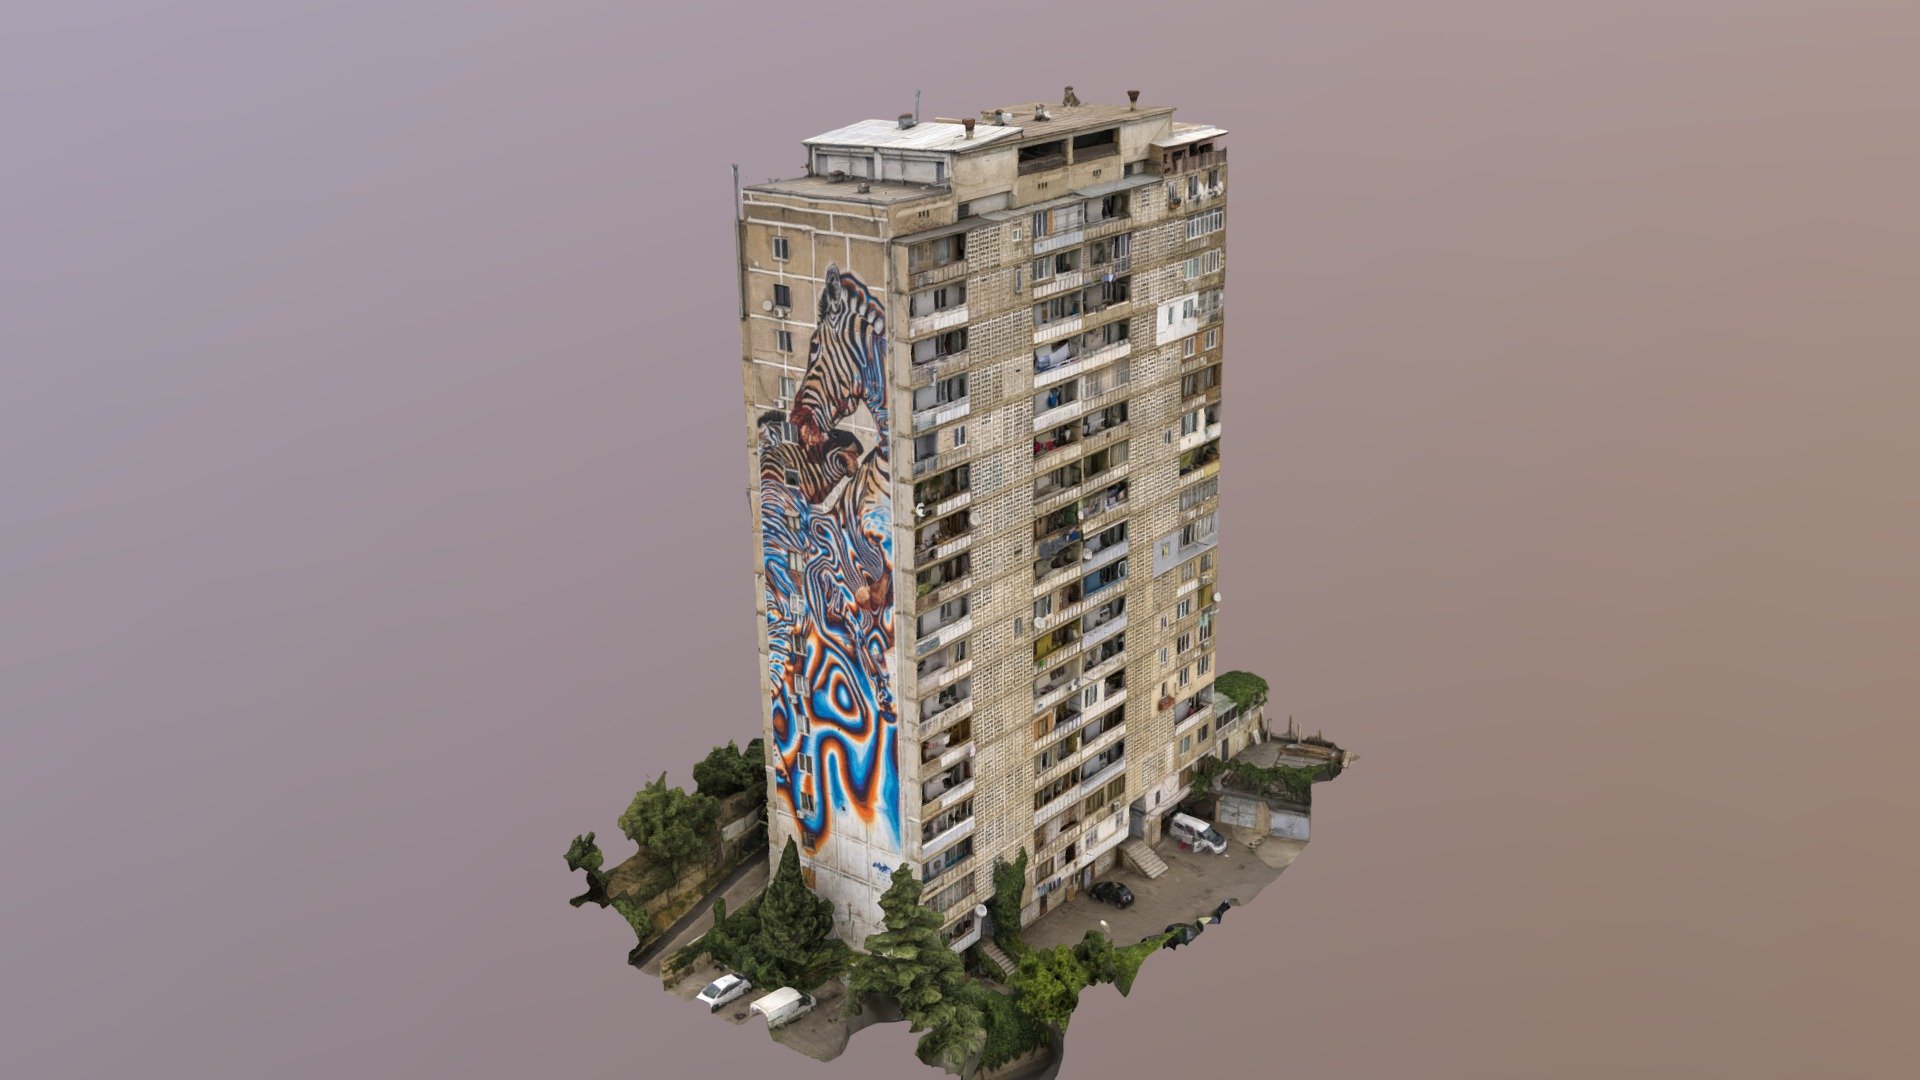 Found this apartment building while flying around Saburtalo district of Tbilisi. Unfortunately I could not reach its further side due to conneciton issues.
Location

Shot on DJI Mavic Air 2

Processed with Agisoft Metashape - House with Zebras Mural (half) - Download Free 3D model by Nik (@nikska) 3d model